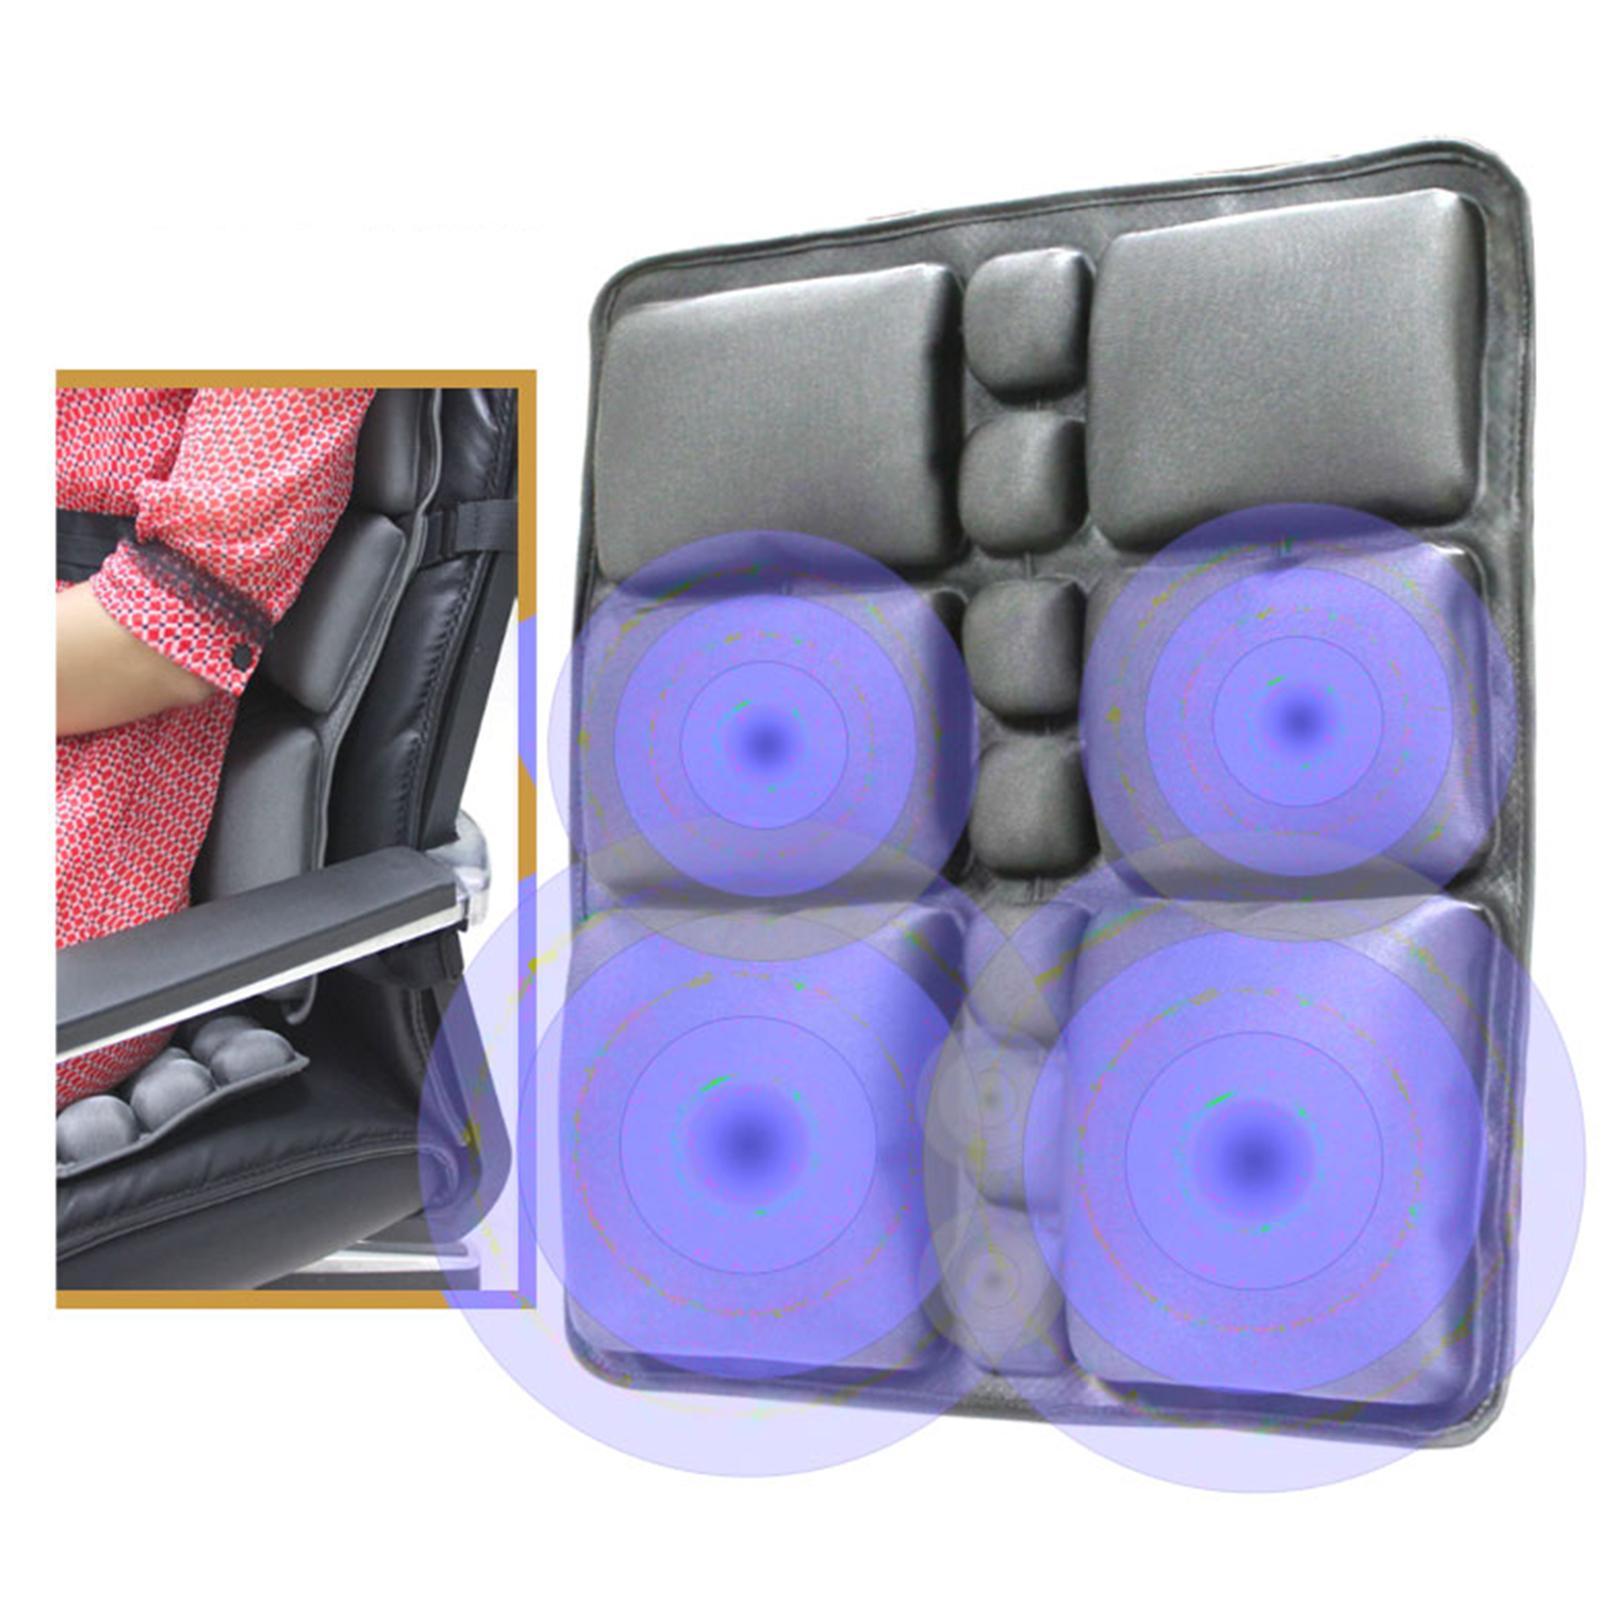 Lumbar Support Pillow Inflatable Comfortable Orthopedic for Travel Gray